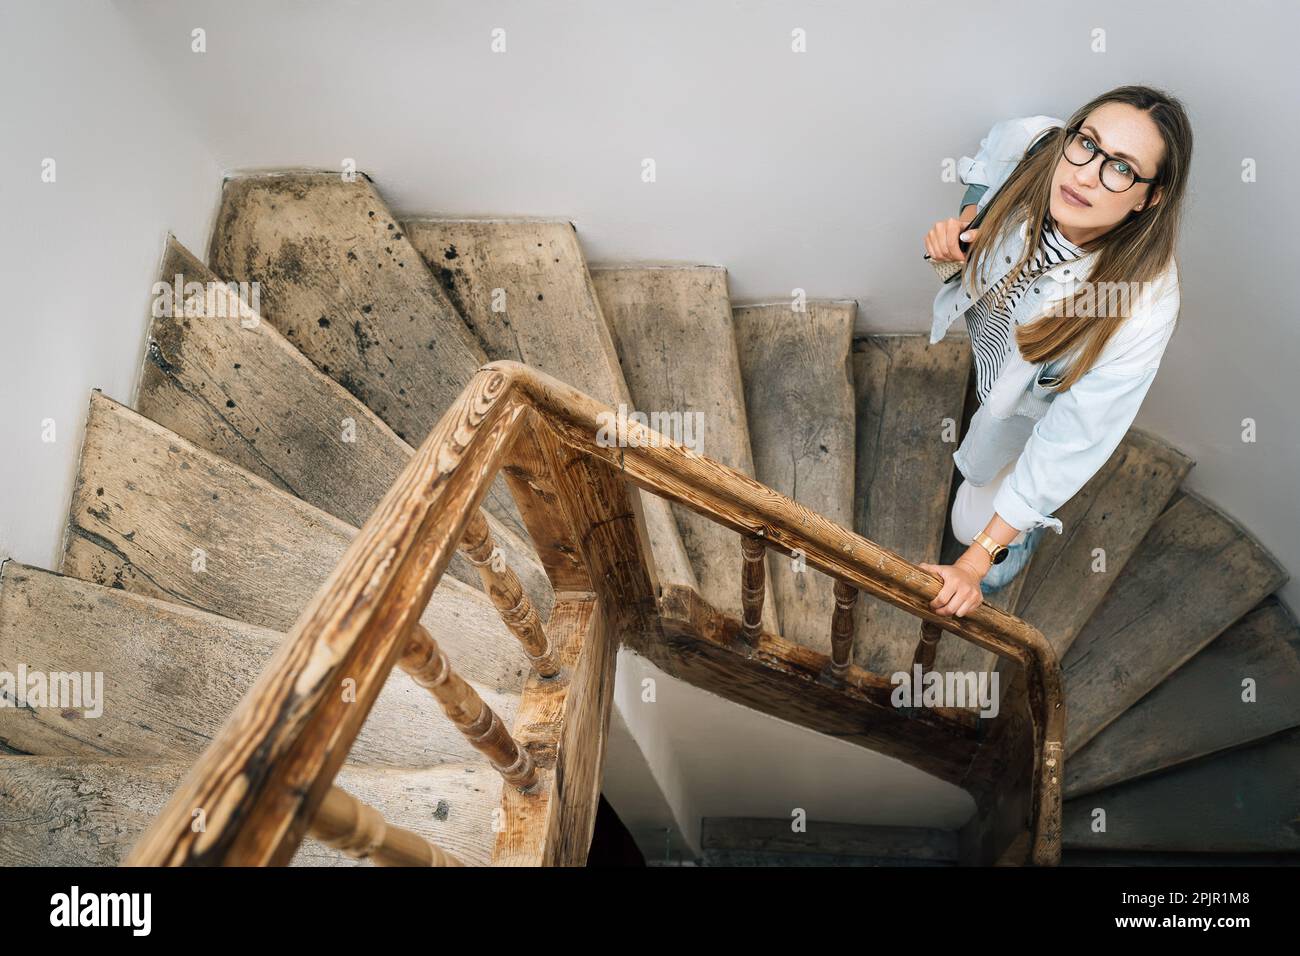 A woman looks up standing on an old wooden staircase Stock Photo